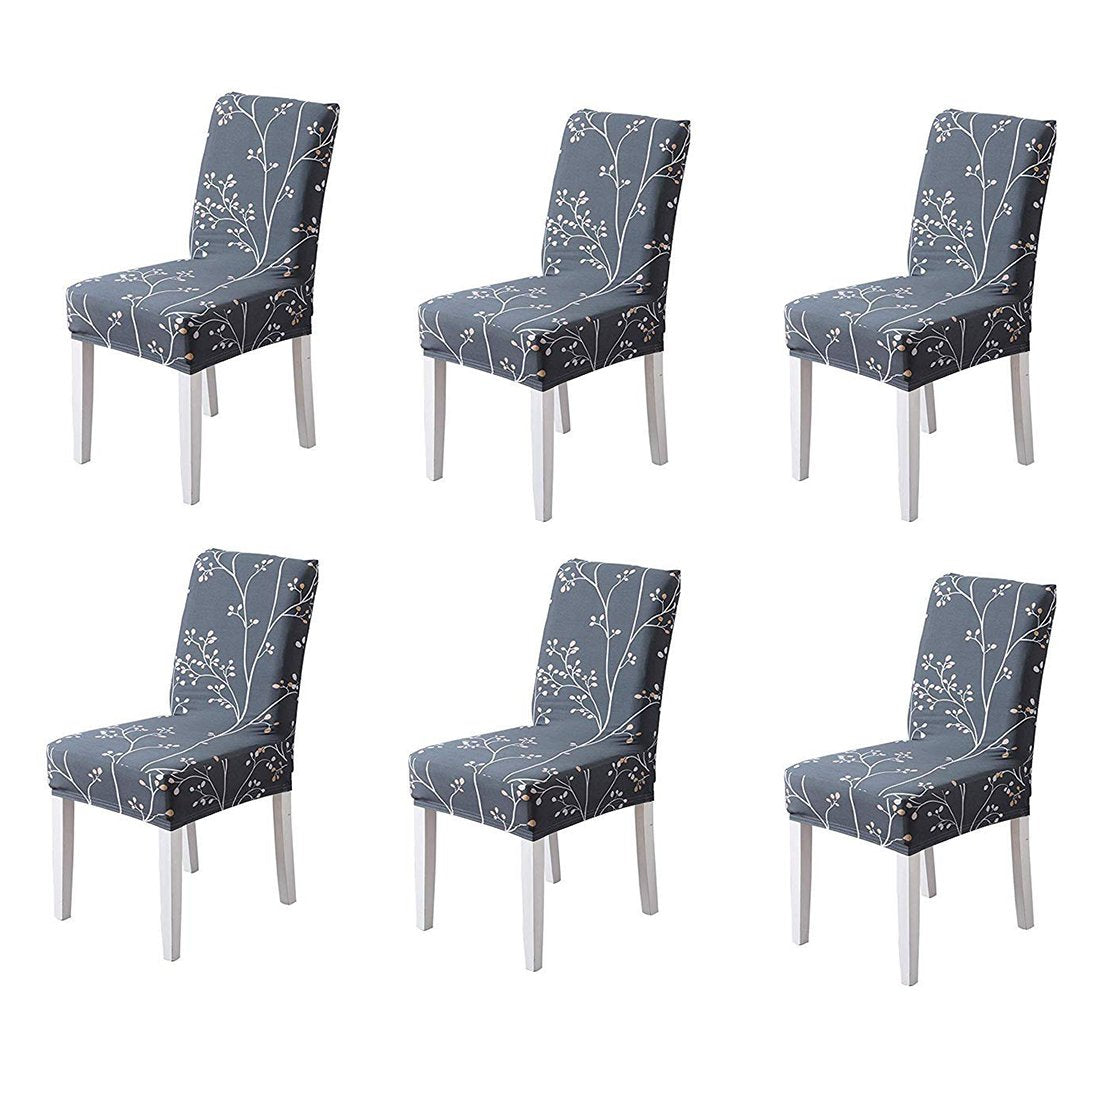 Printed Elastic Chair Cover - Branch Midnight